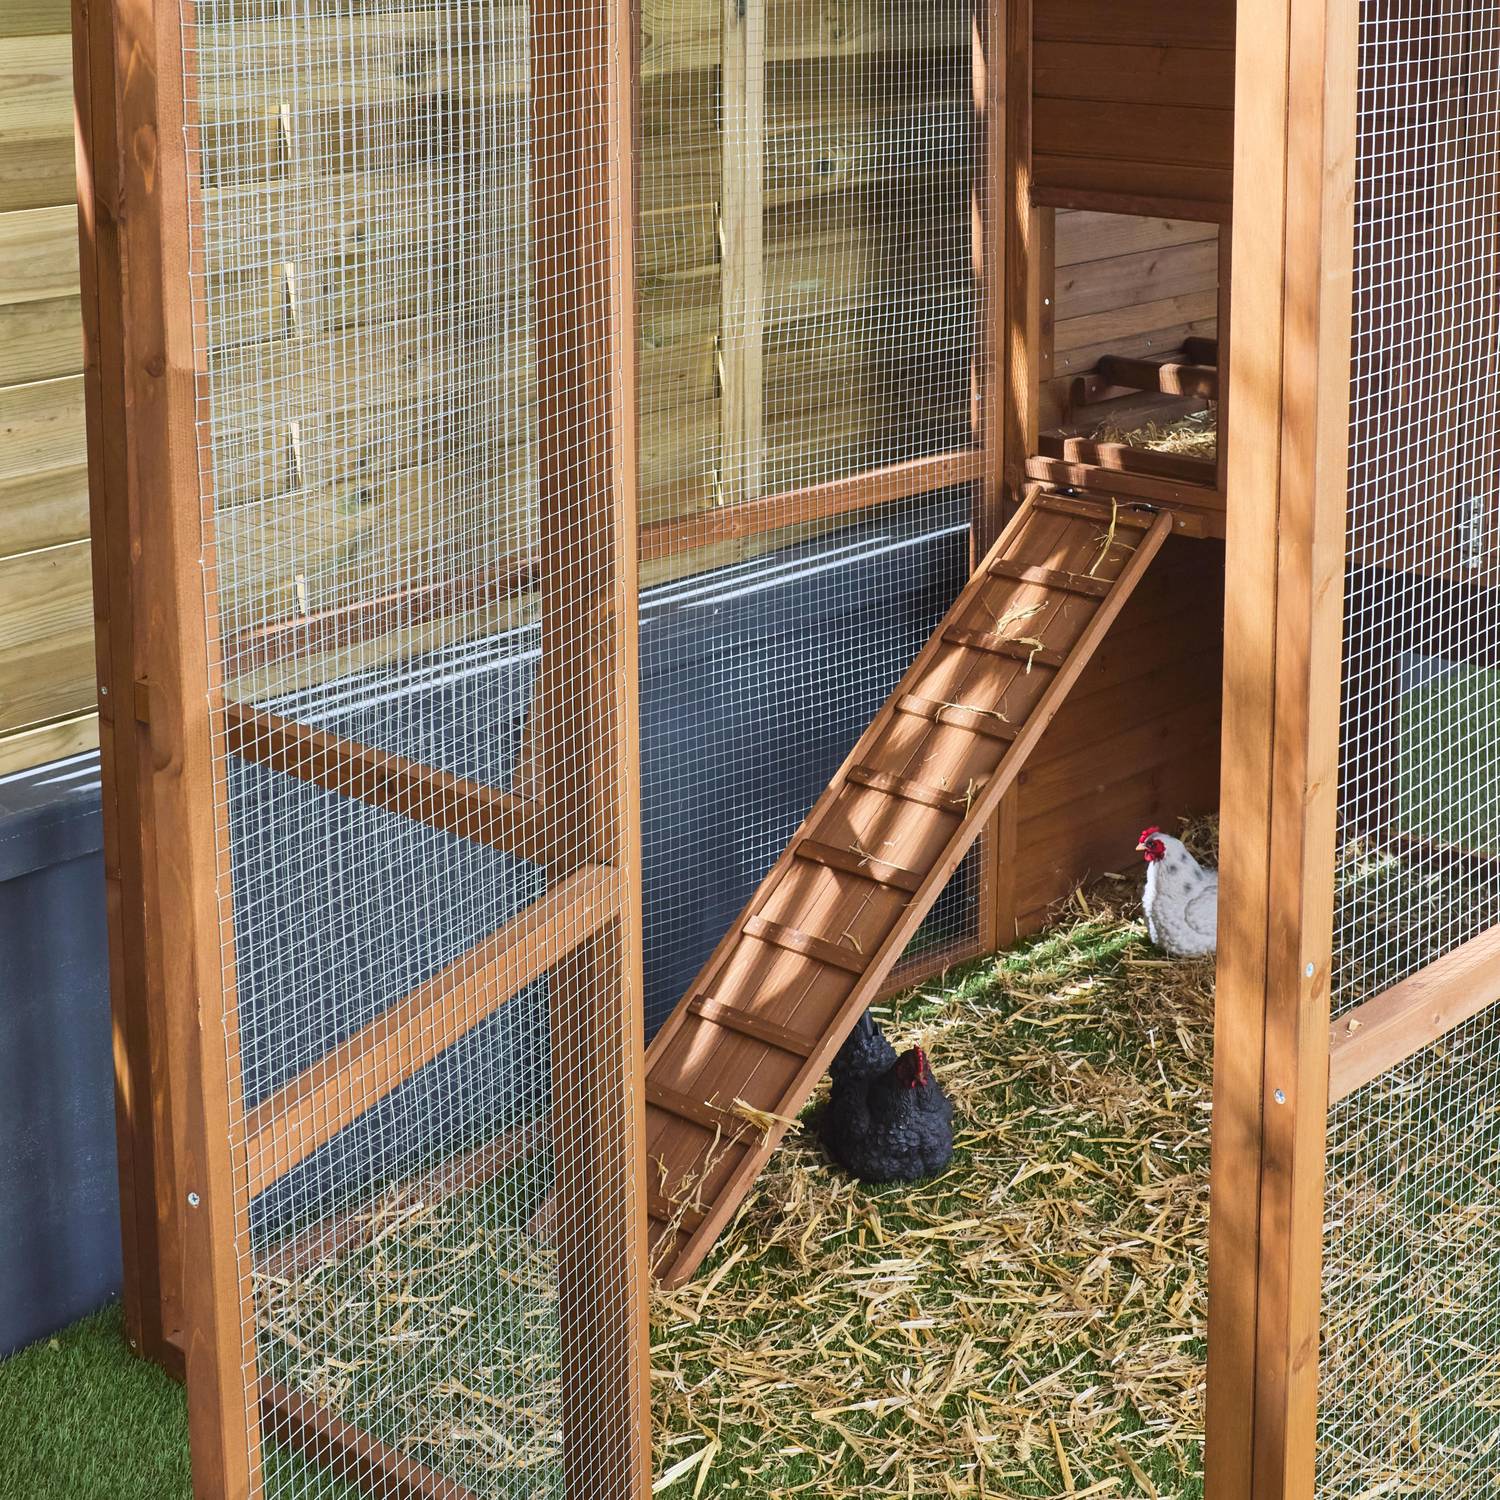 Wooden chicken coop - backyard hen cage for 6 to 8 chickens, indoor and outdoor space - Cotentine - Wood colour Photo3